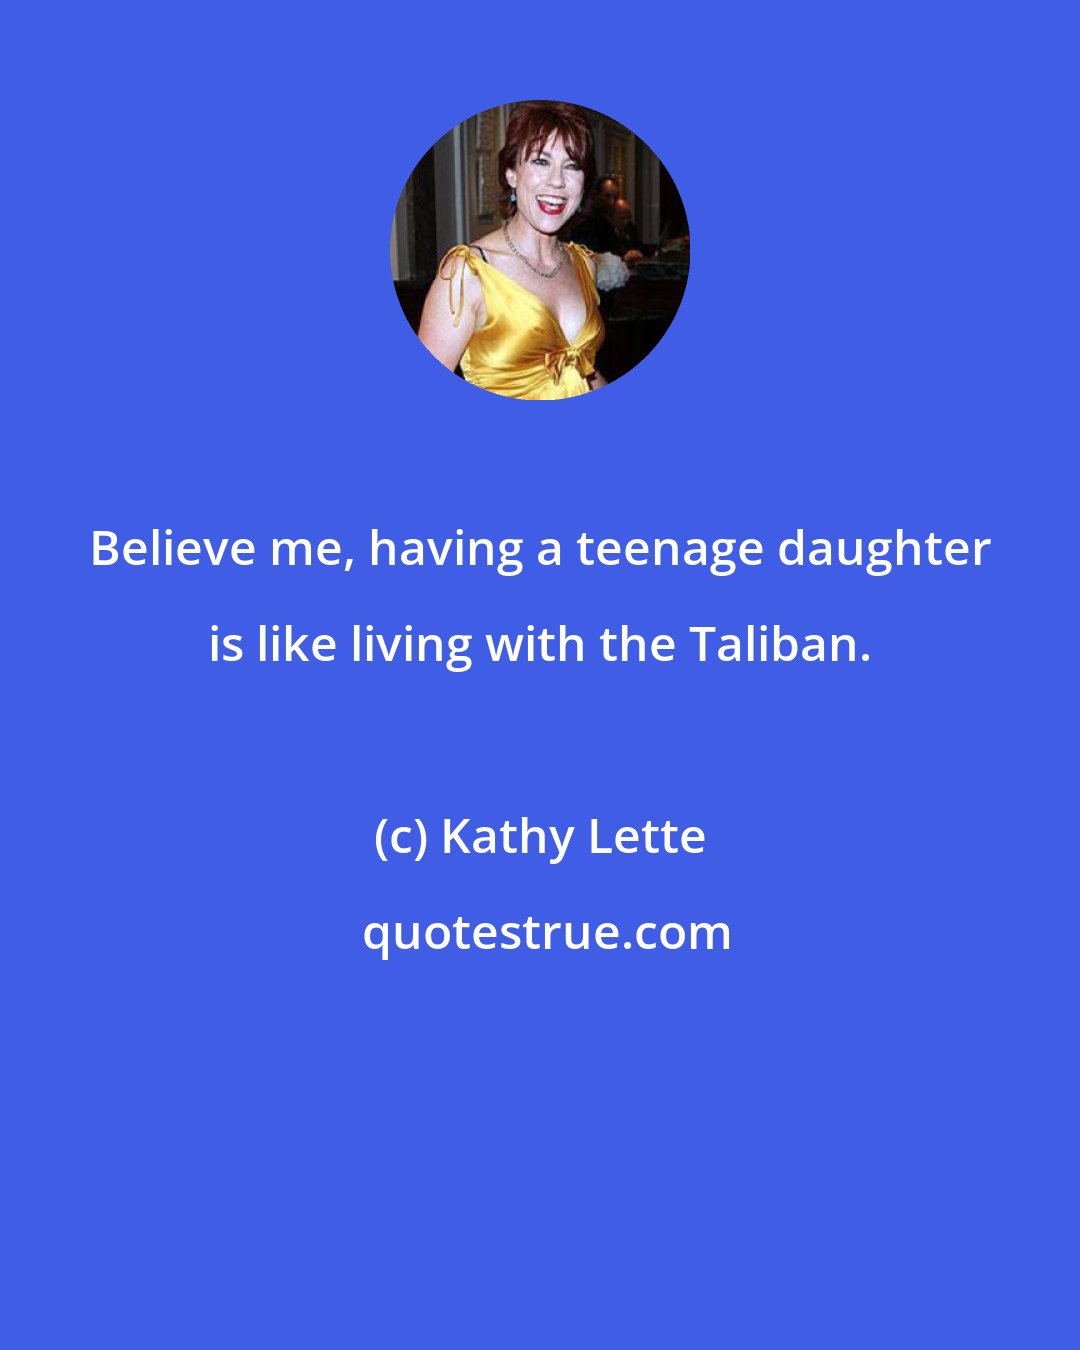 Kathy Lette: Believe me, having a teenage daughter is like living with the Taliban.